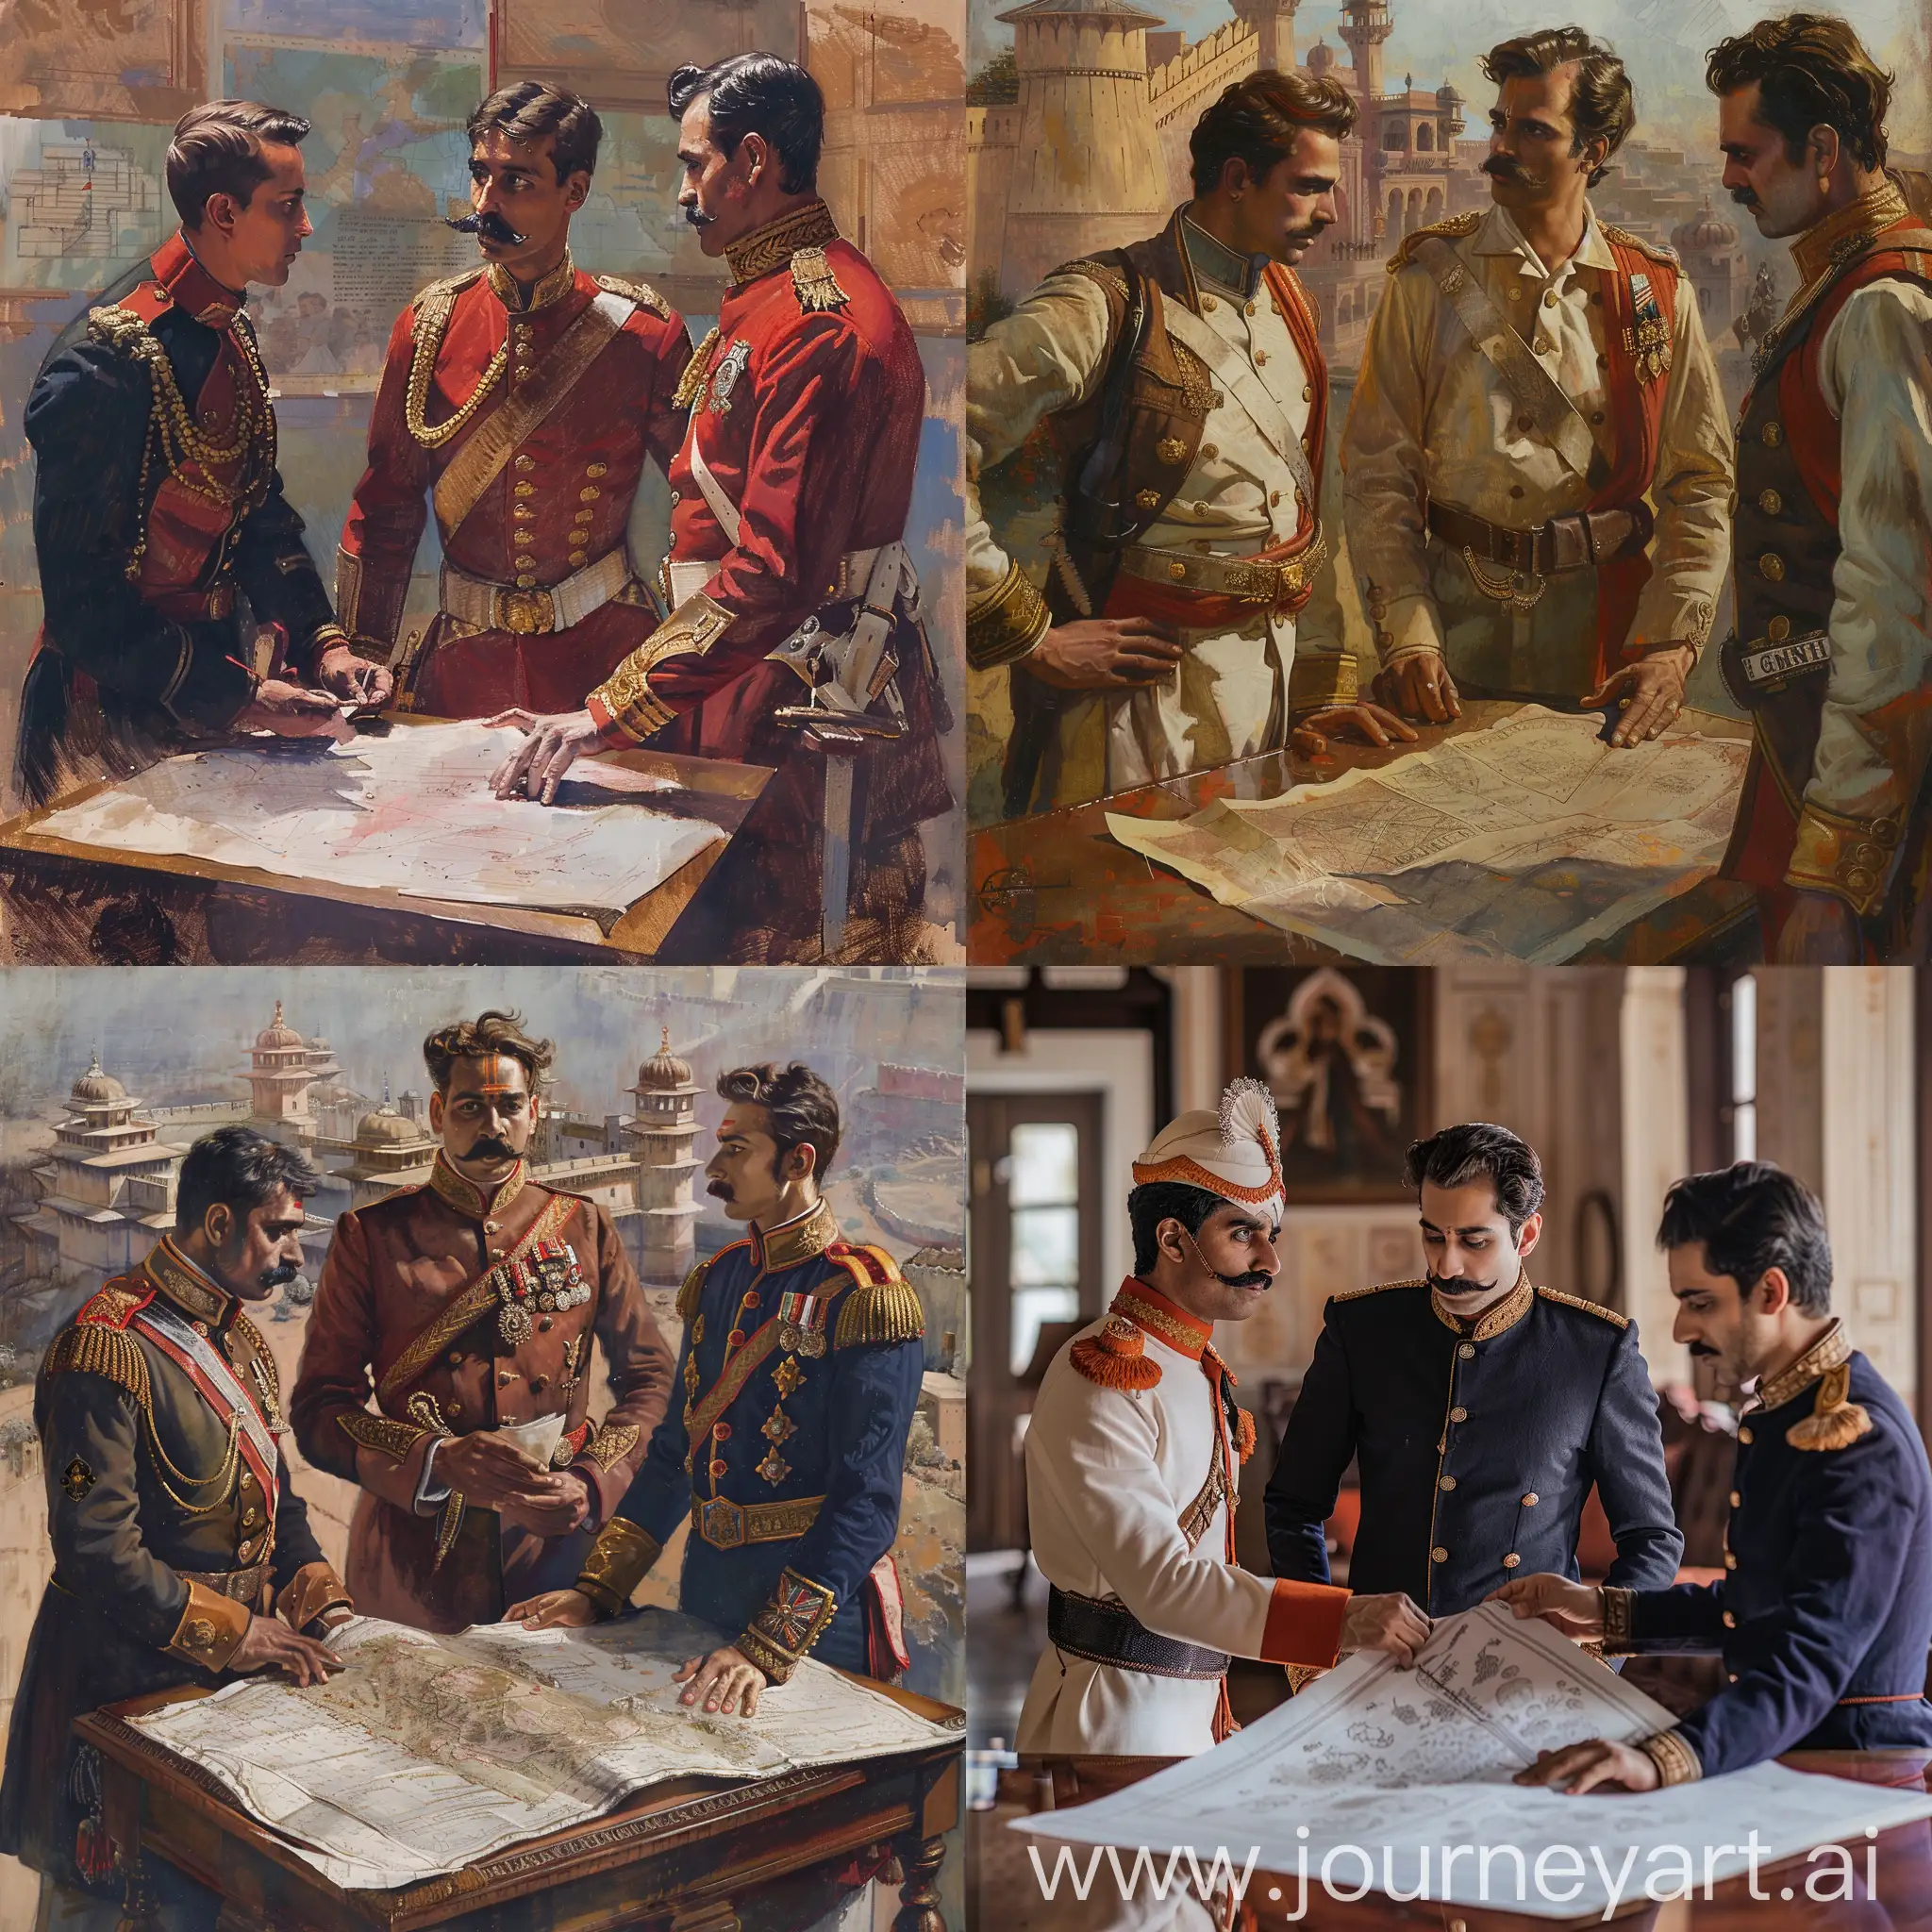 Rajput-King-Maharaja-Ganga-Singh-Receives-Strategy-Briefing-from-English-Officers-in-1900